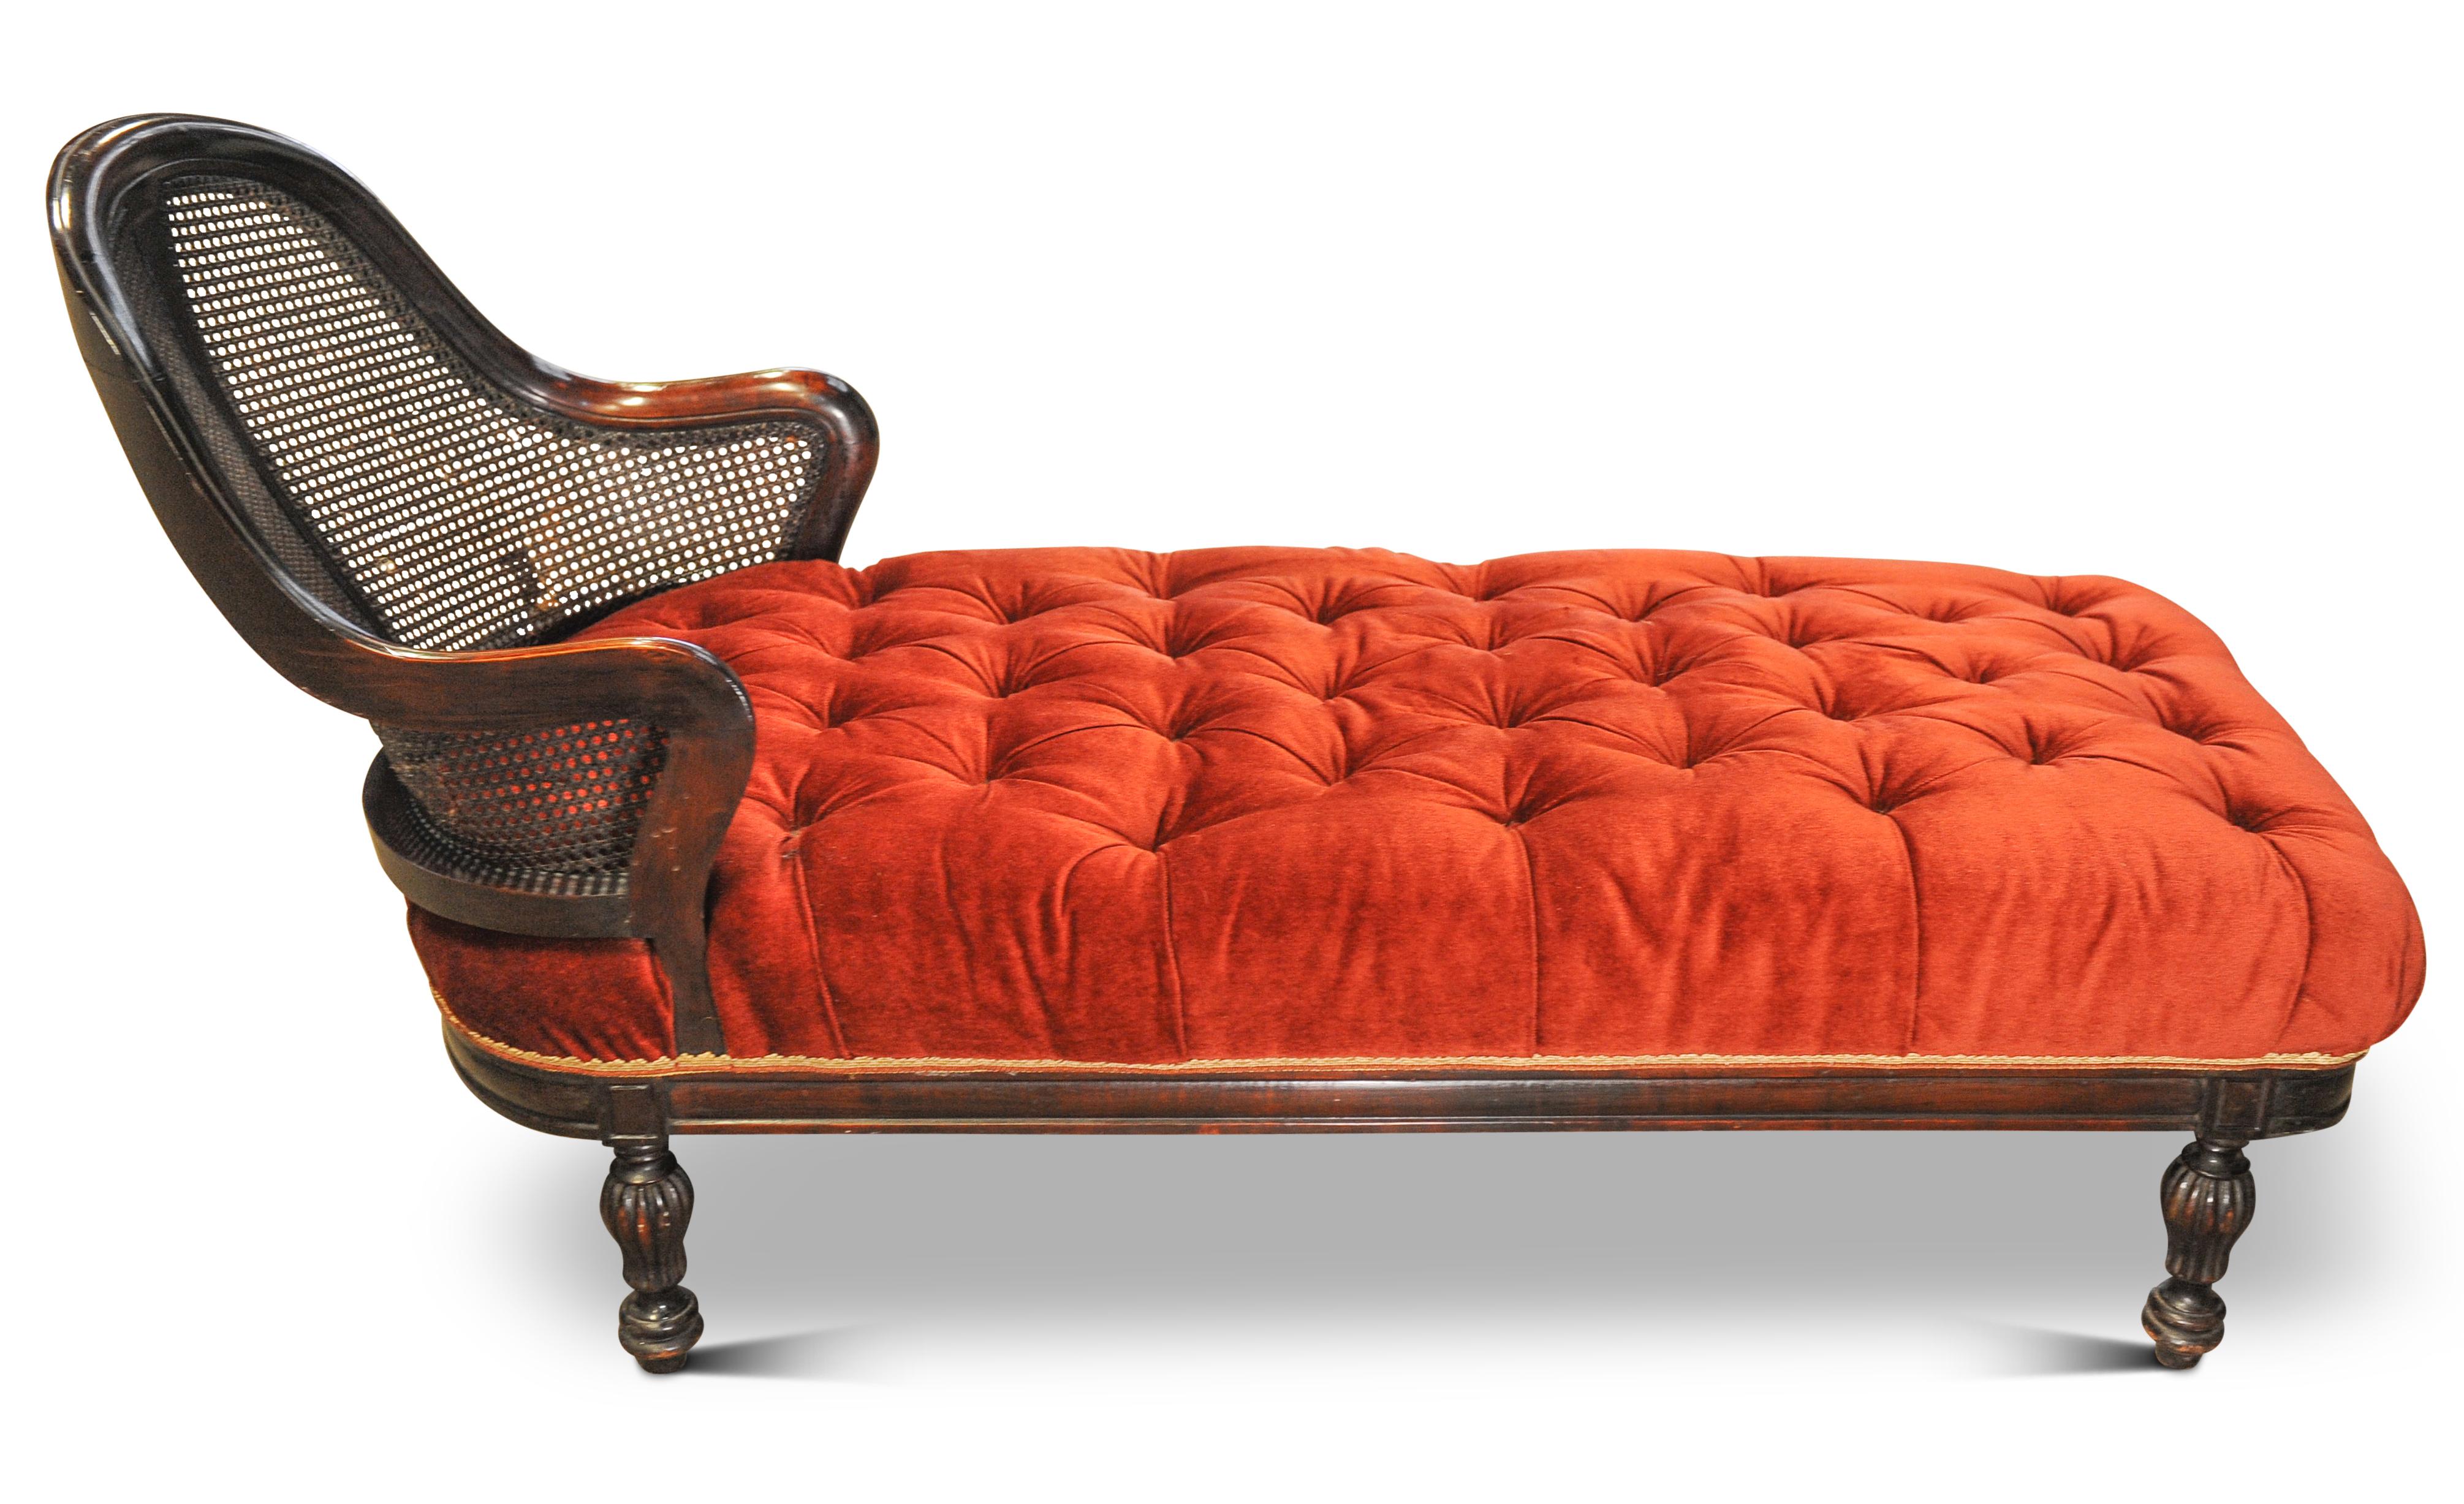 Rare Victorian Red Velvet Chesterfield Bergere Chaise Longue / Day Bed  For Sale 2